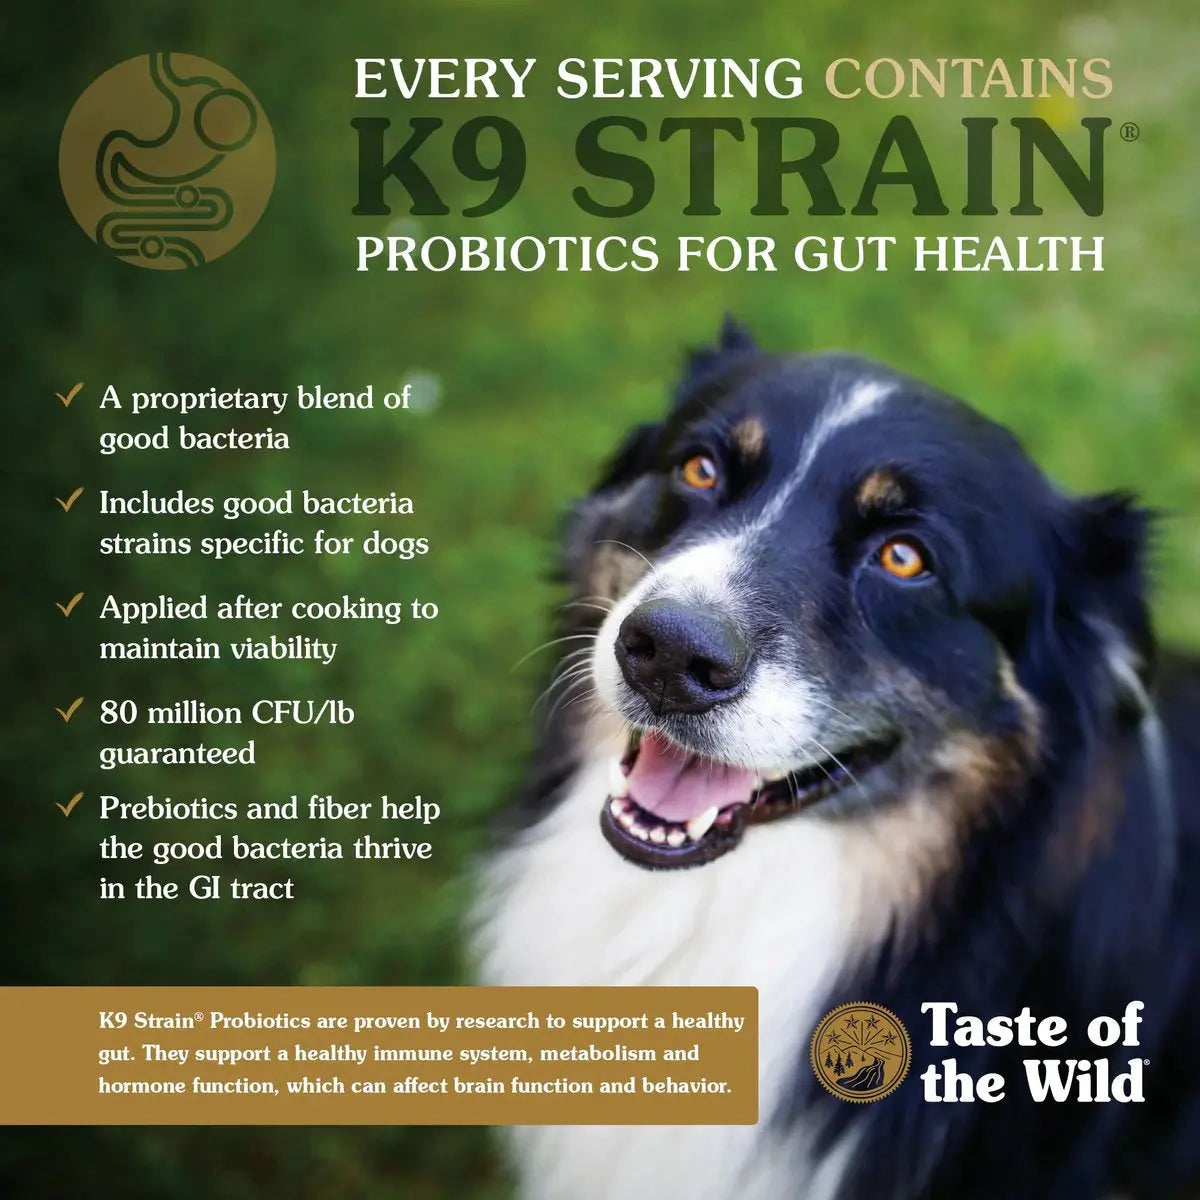 Taste of the Wild® Appalachian Valley® Venison and Garbanzo Beans Small Breed Canine Recipe Dry Dog Food Taste of the Wild®